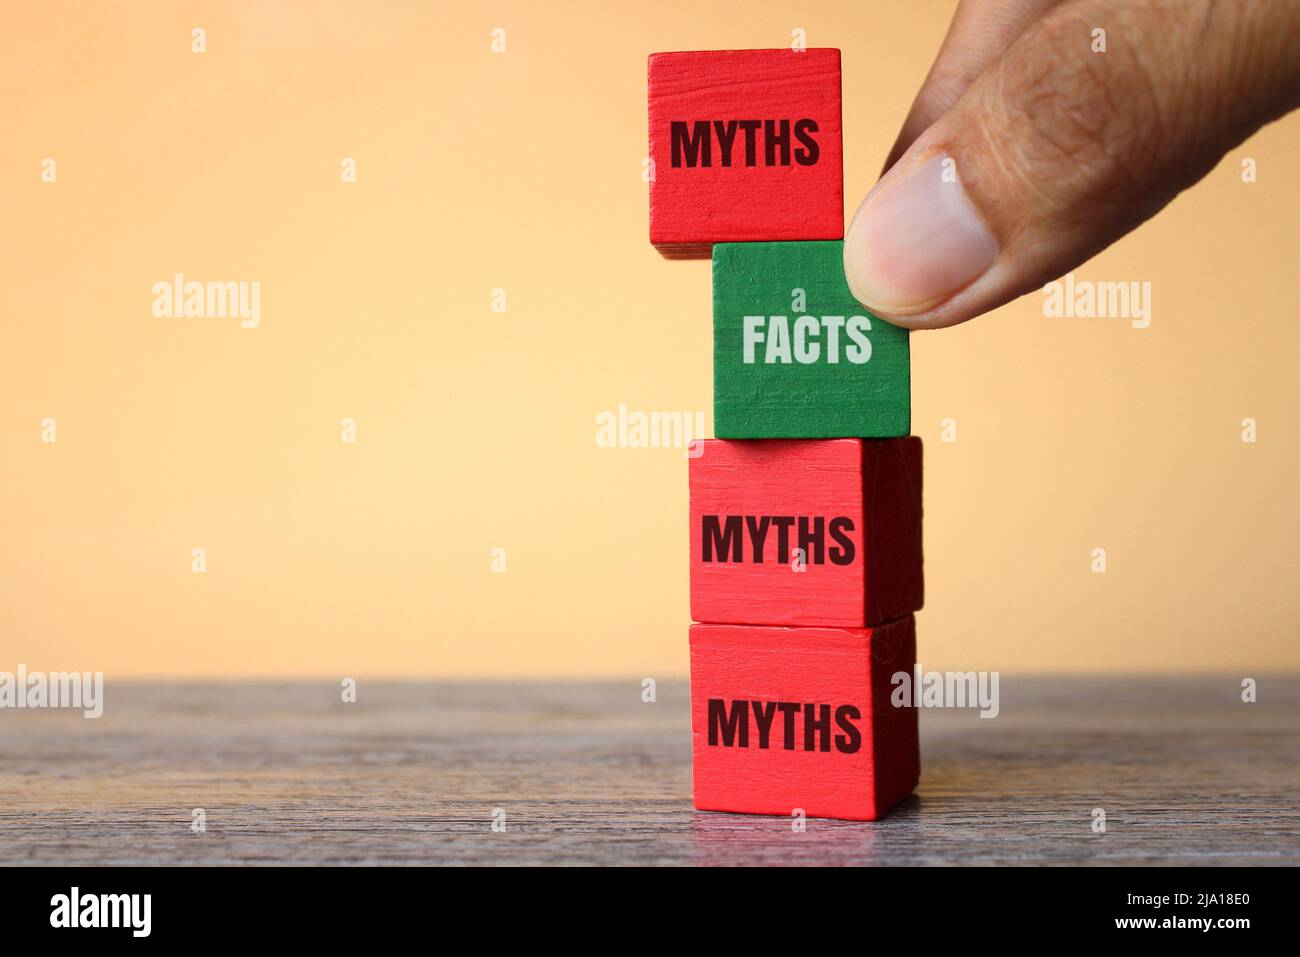 Hand pick wooden cube with text FACTS over MYTHS. Facts vs myths concept. Stock Photo